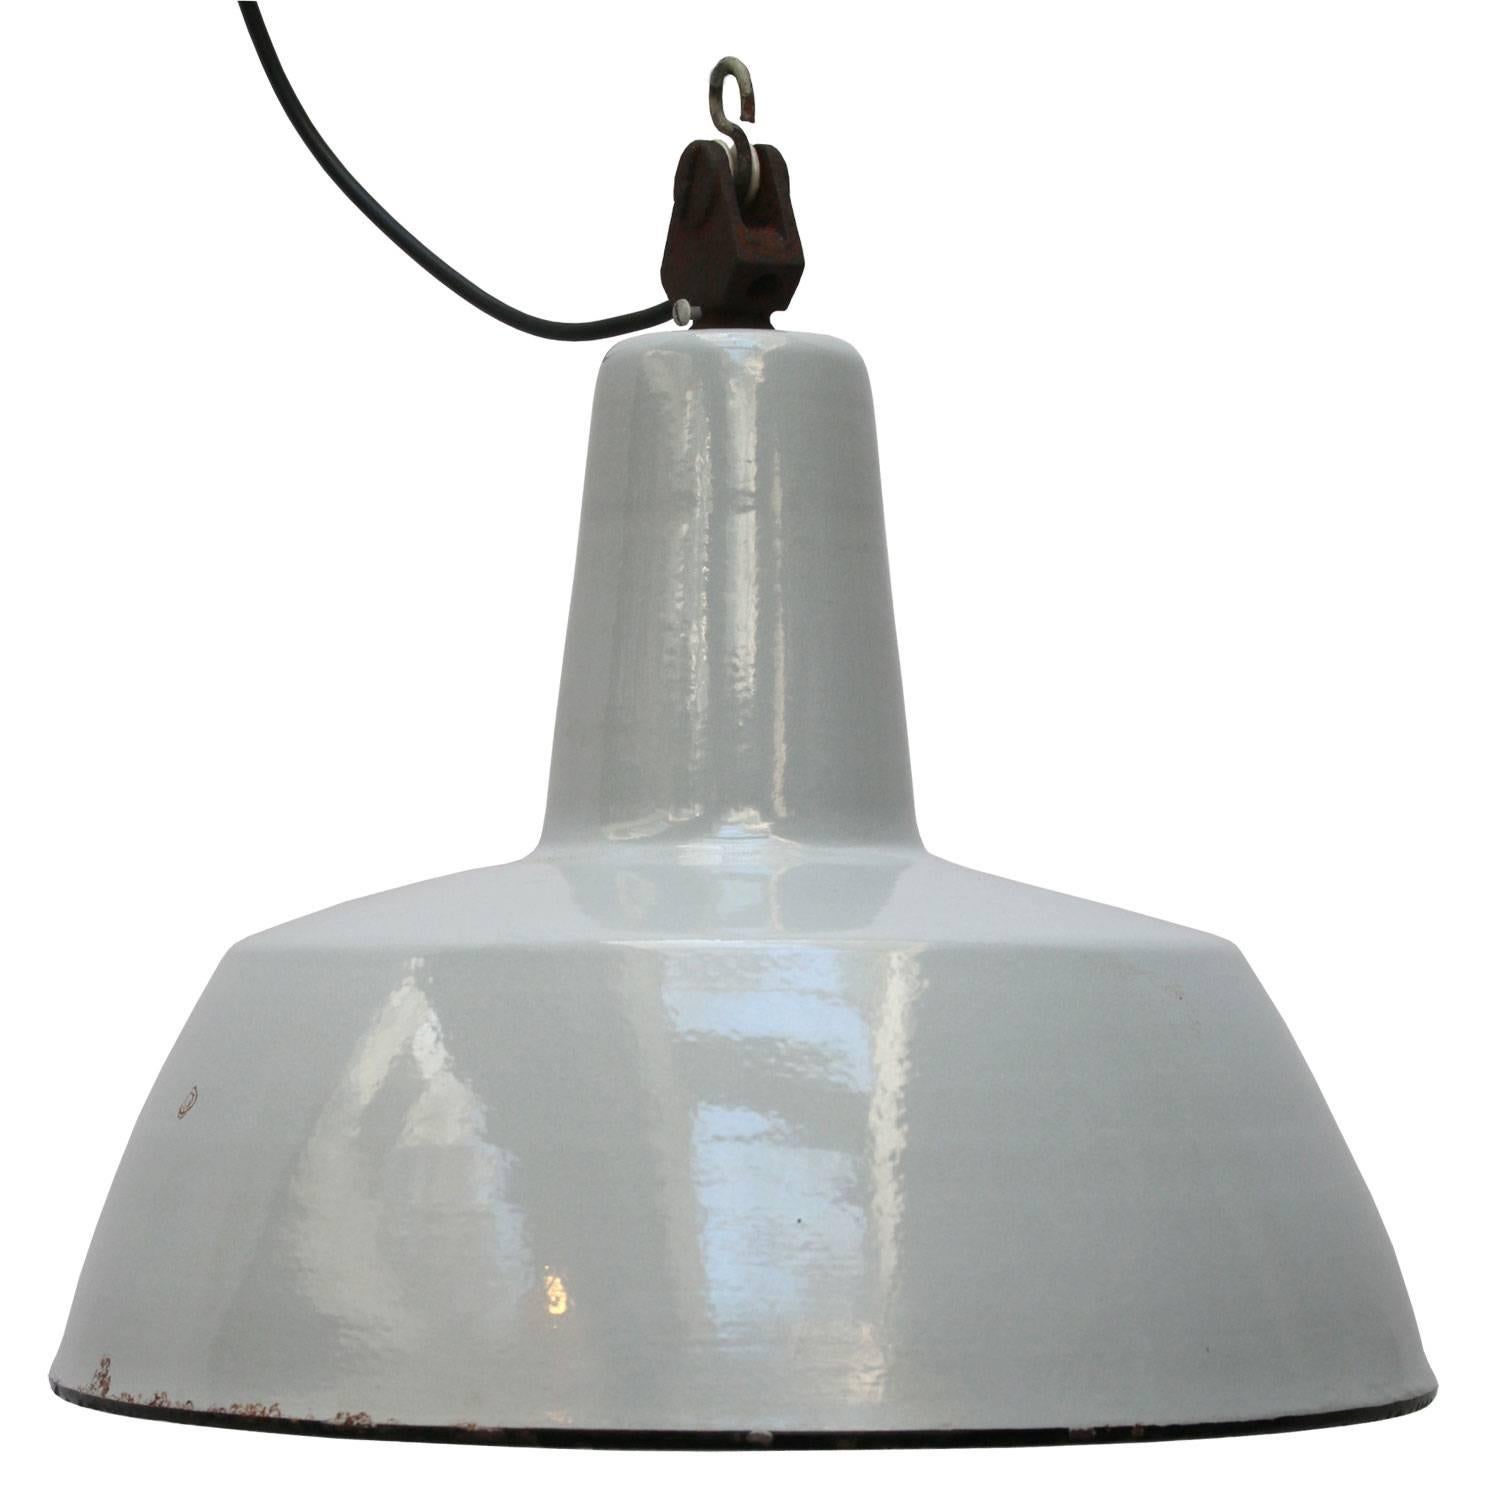 Oosterbeek II. Industrial hanging lamp made by Philips, Holland.
Grey enamel. White interior.

Weight: 2.2 kg / 4.9 lb

All lamps have been made suitable by international standards for incandescent light bulbs, energy-efficient and LED bulbs.